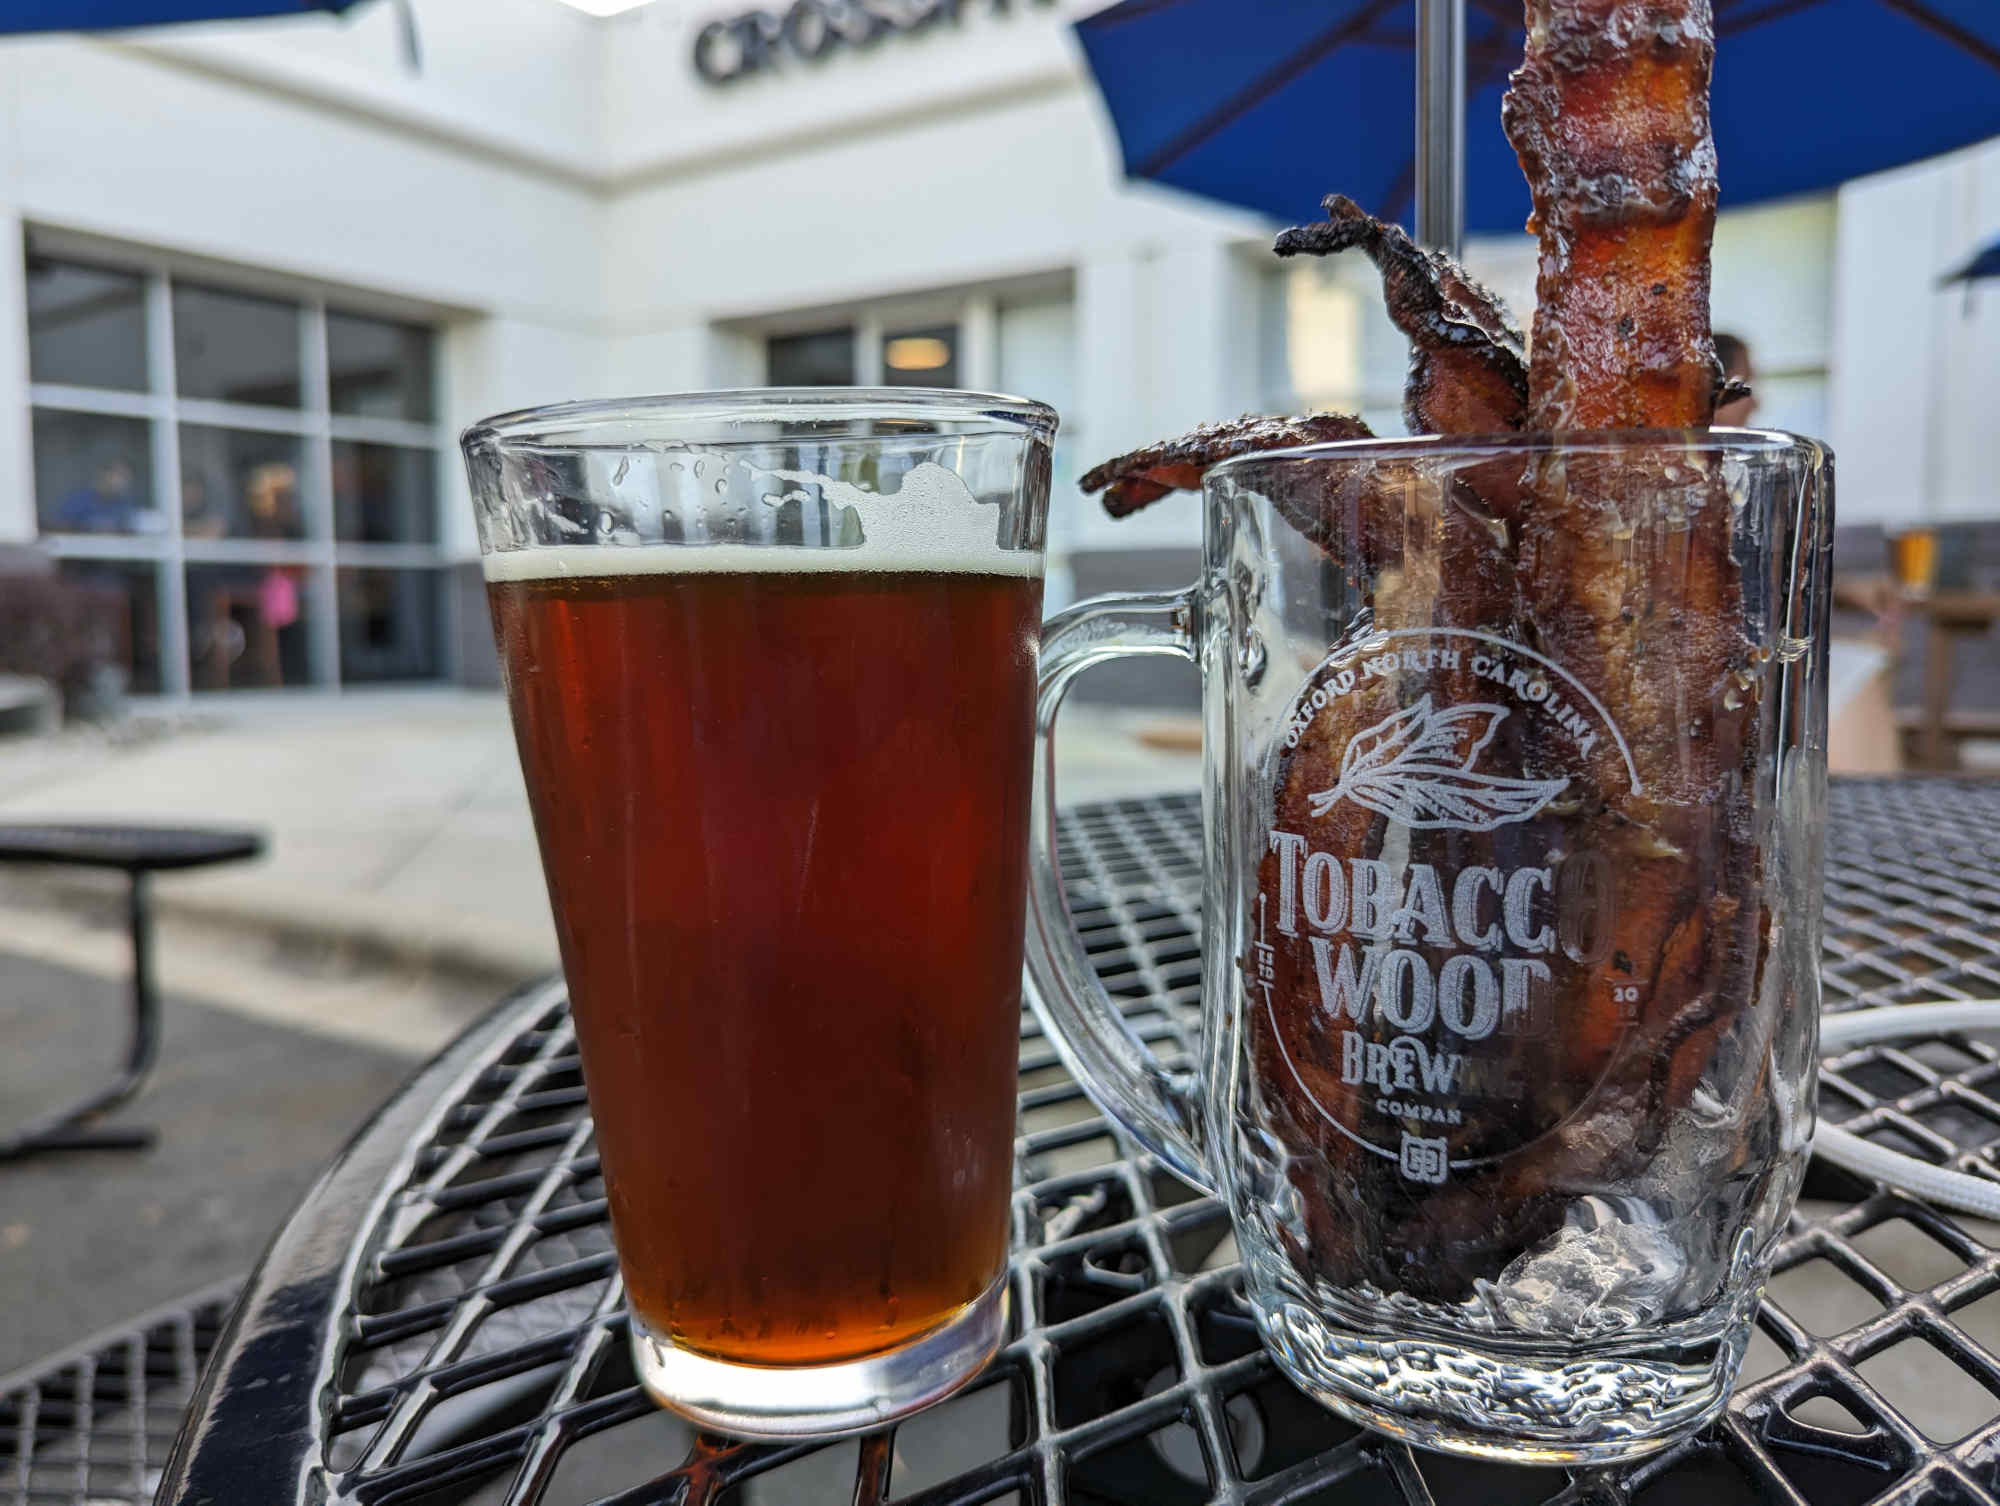 Tobacco Wood Brewing Company - Beer Drinkers